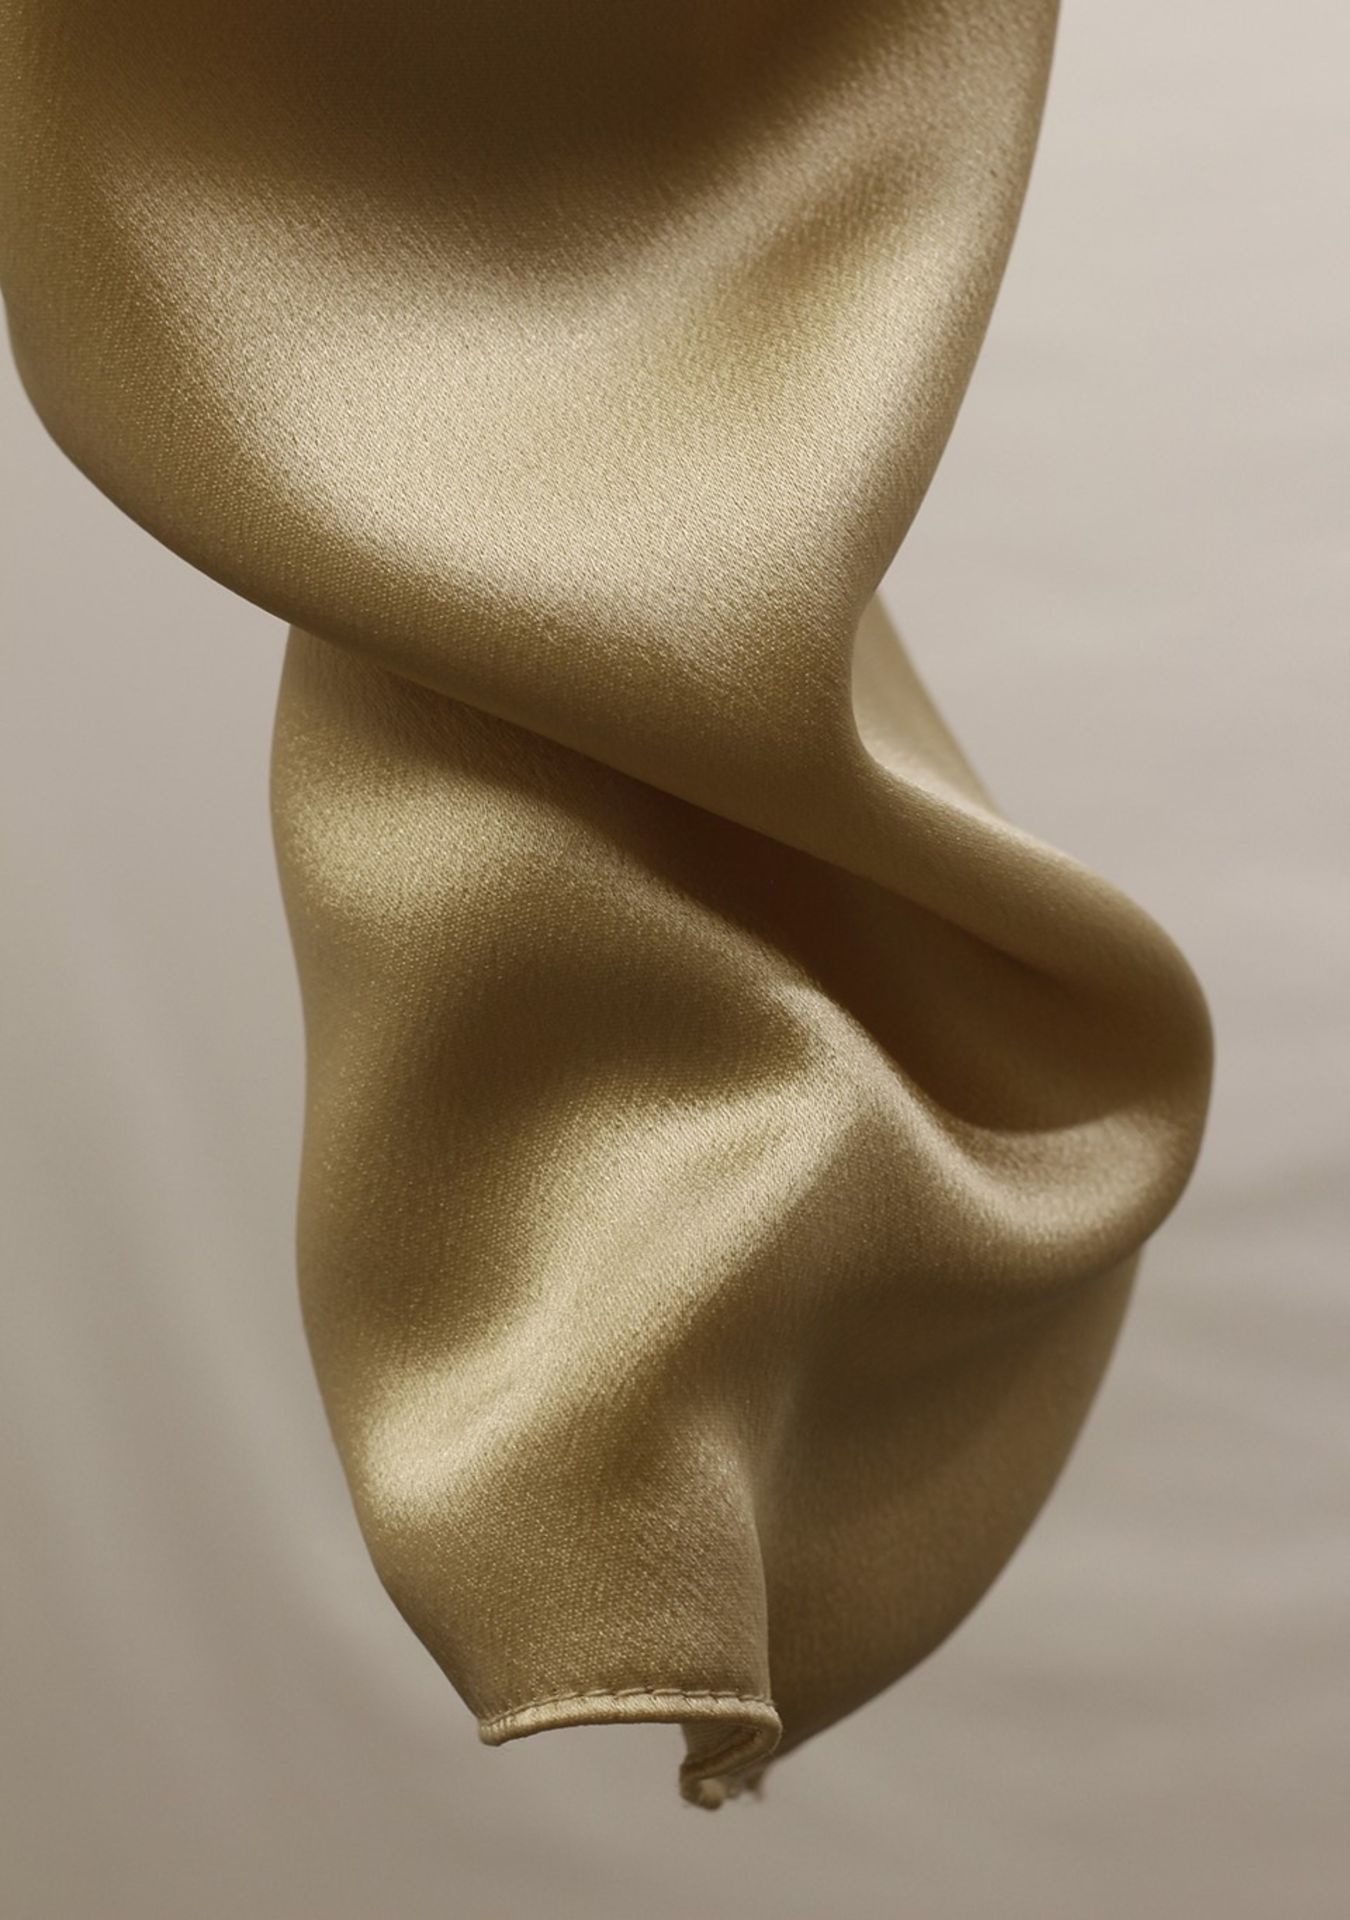 1 x Anne Belin Champagne Bolero - Size: 16 - Material: 50% Viscose, 50% Acetate - From a High End - Image 6 of 6